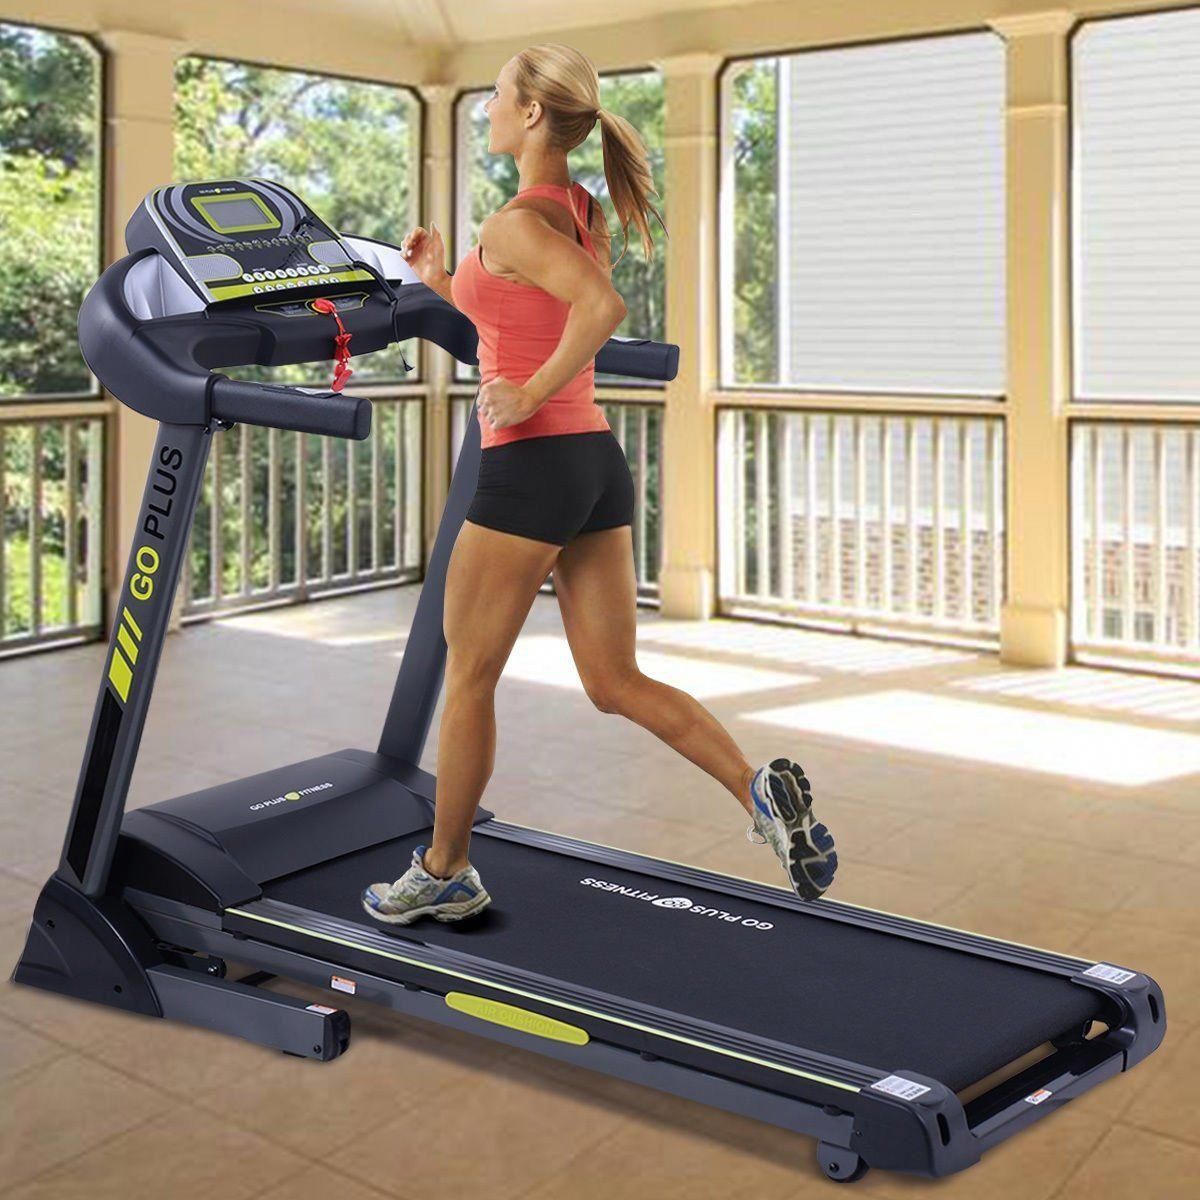 Get into Shape with Your Own Home Treadmill Exercise Equipment